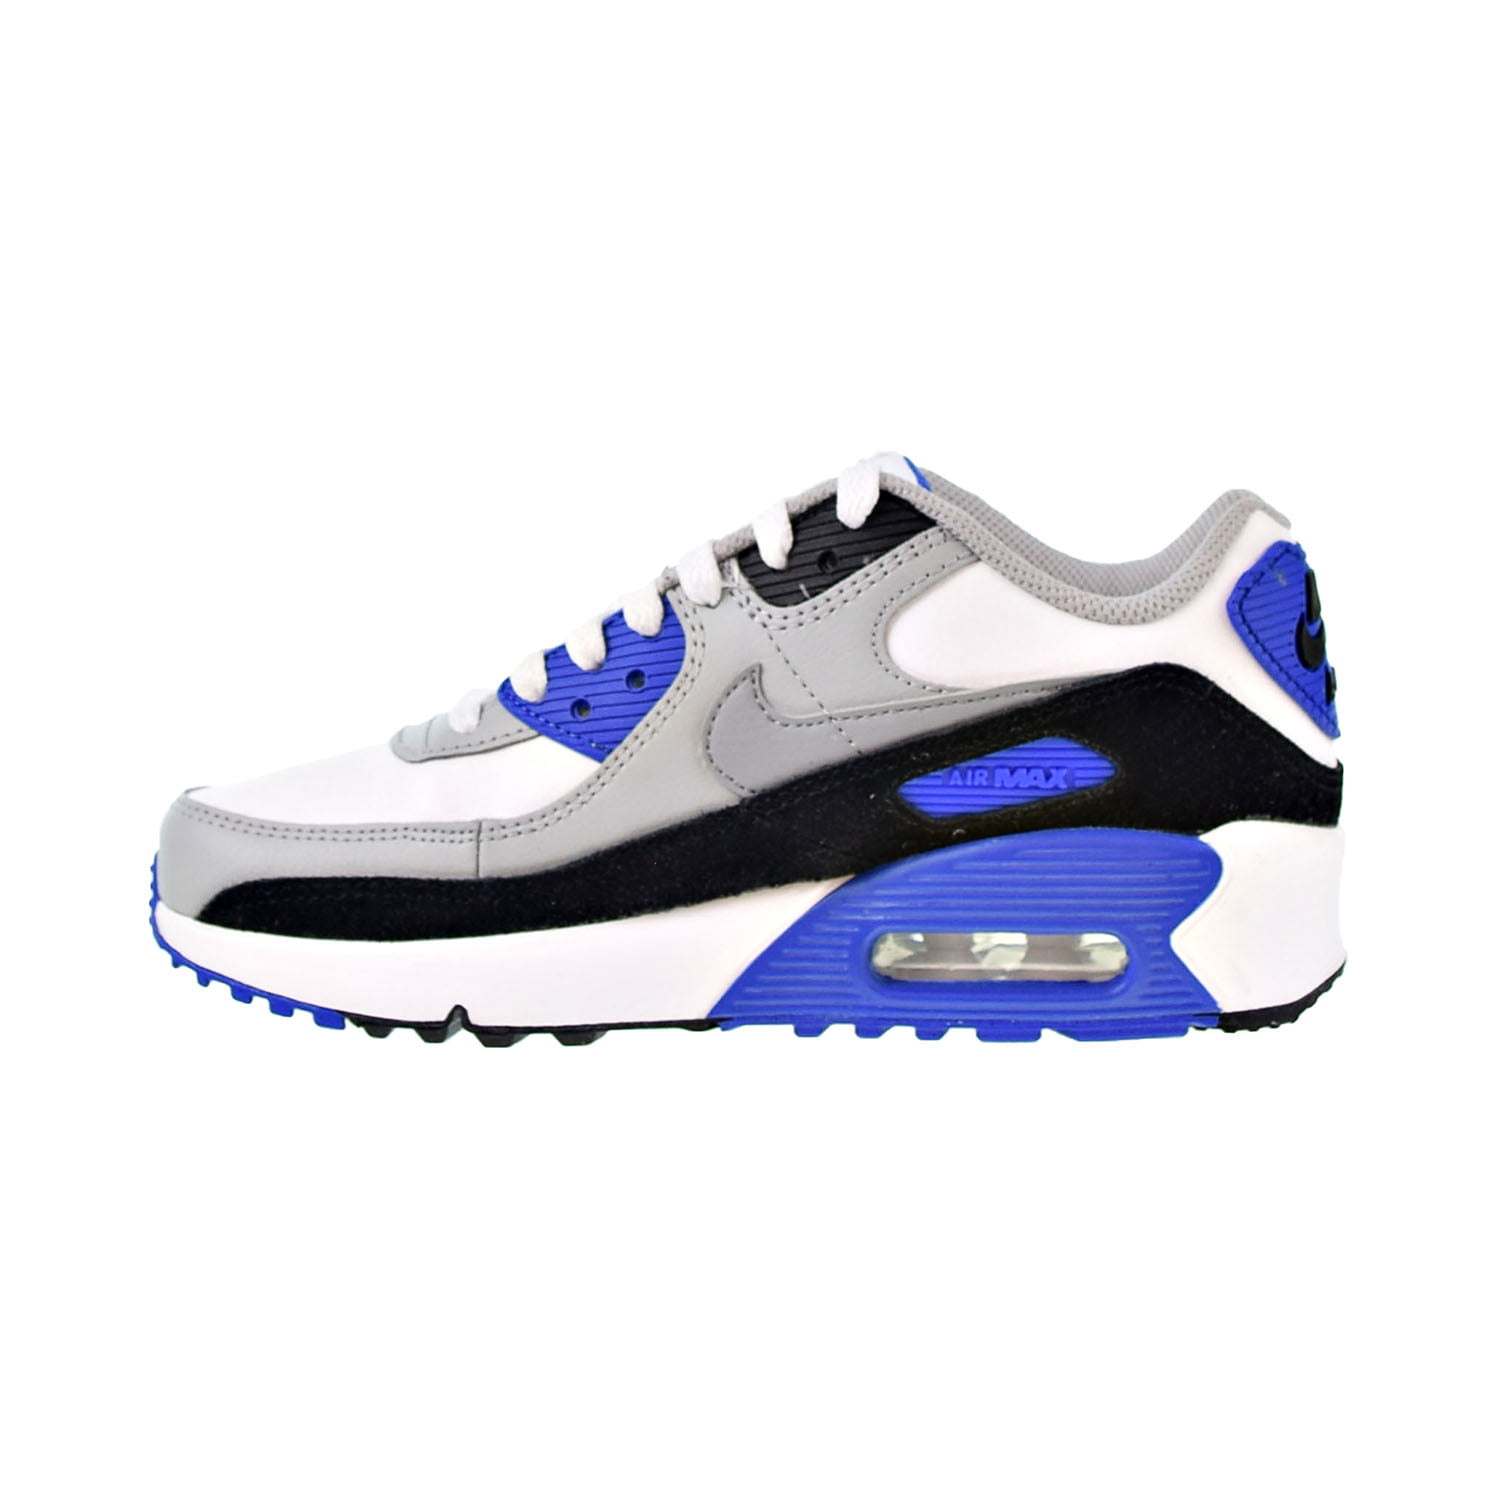 Nike Air Max 90 LTR Big Kids' Shoes White-Particle Grey-Navy cd6864-103